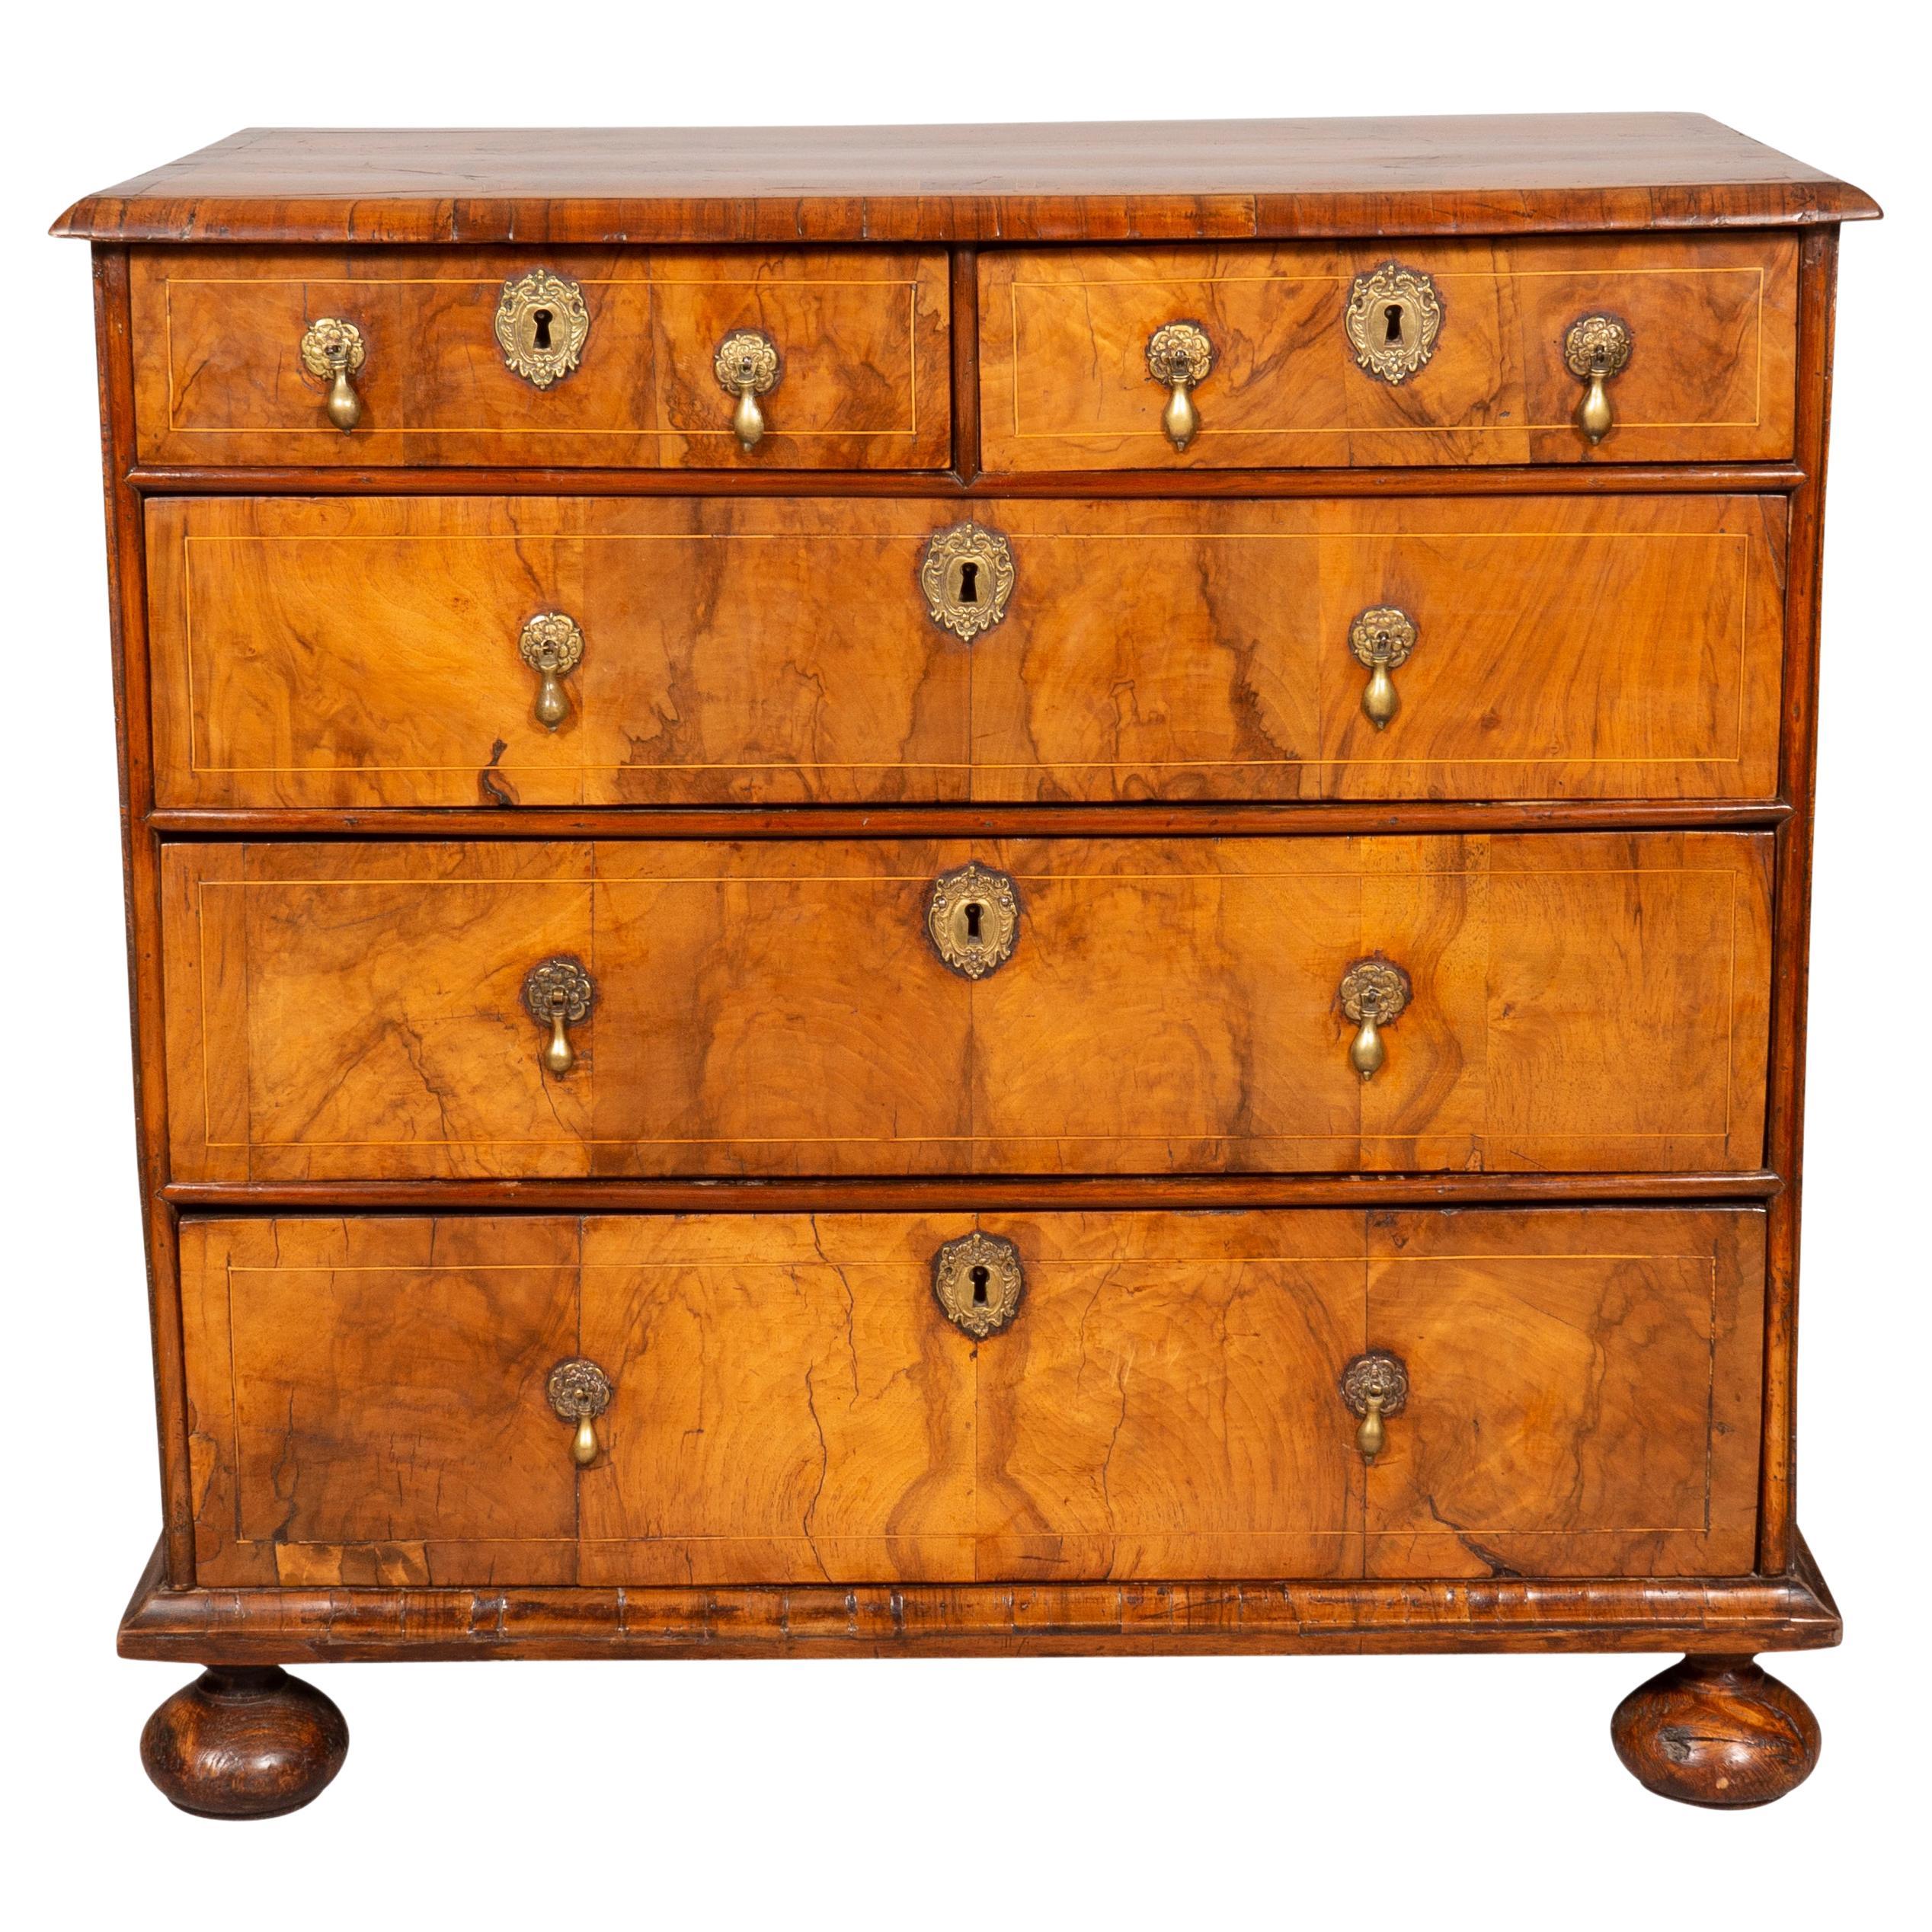 With a rectangular top with paneled inlays with central oval and spandrels over two drawers over three drawers, all with brass tear drop pulls. All terminating on bun feet. Locks and handles appear to be original. Sides are elm.